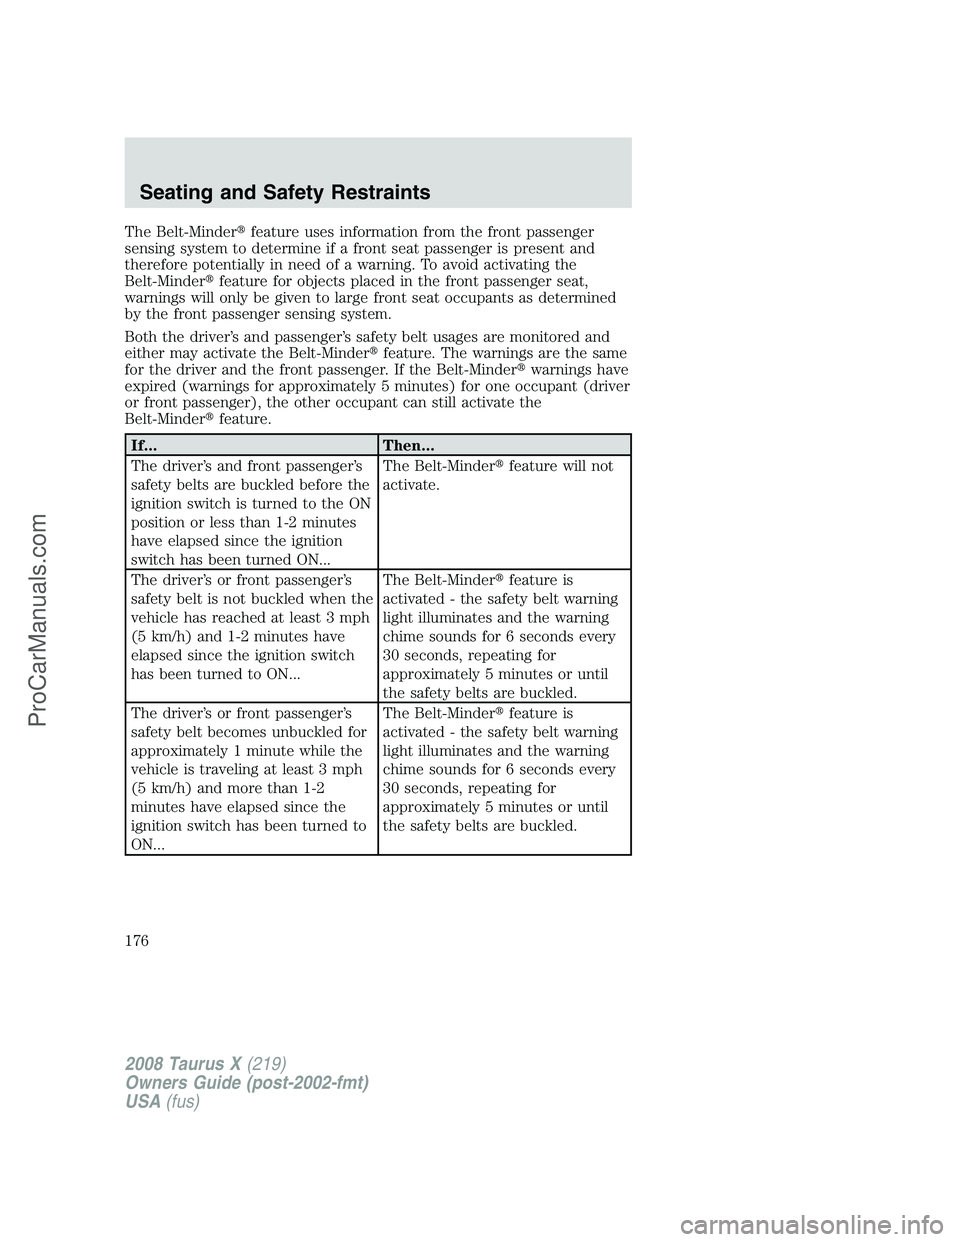 FORD FREESTYLE 2008  Owners Manual The Belt-Minderfeature uses information from the front passenger
sensing system to determine if a front seat passenger is present and
therefore potentially in need of a warning. To avoid activating t